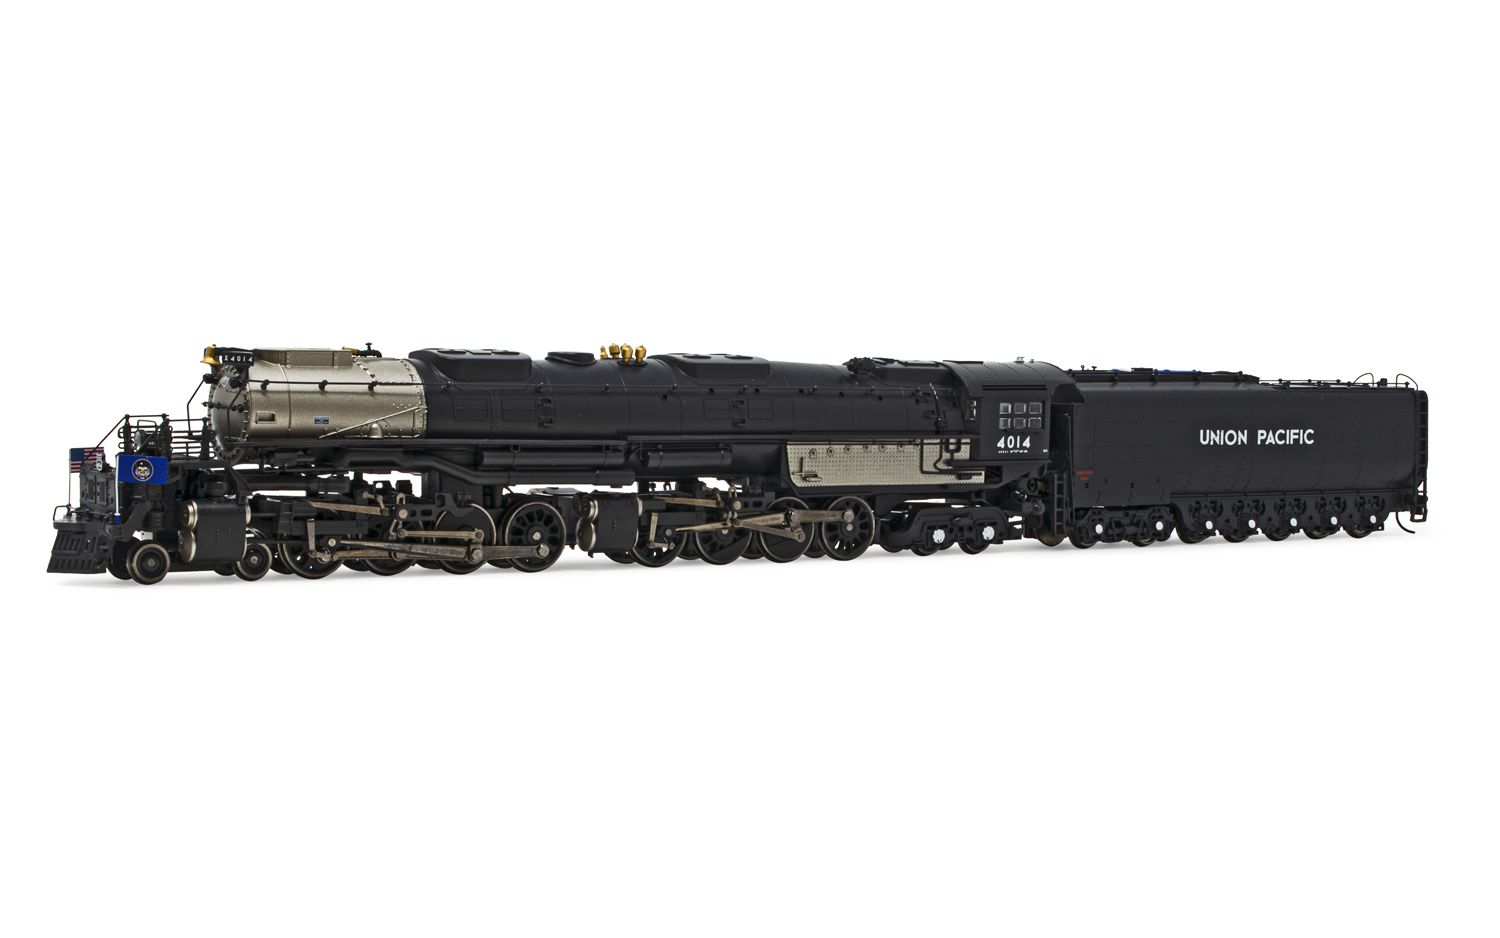 HR2884 UP, “Big Boy” 4014, UP Steam heritage edition (with fuel